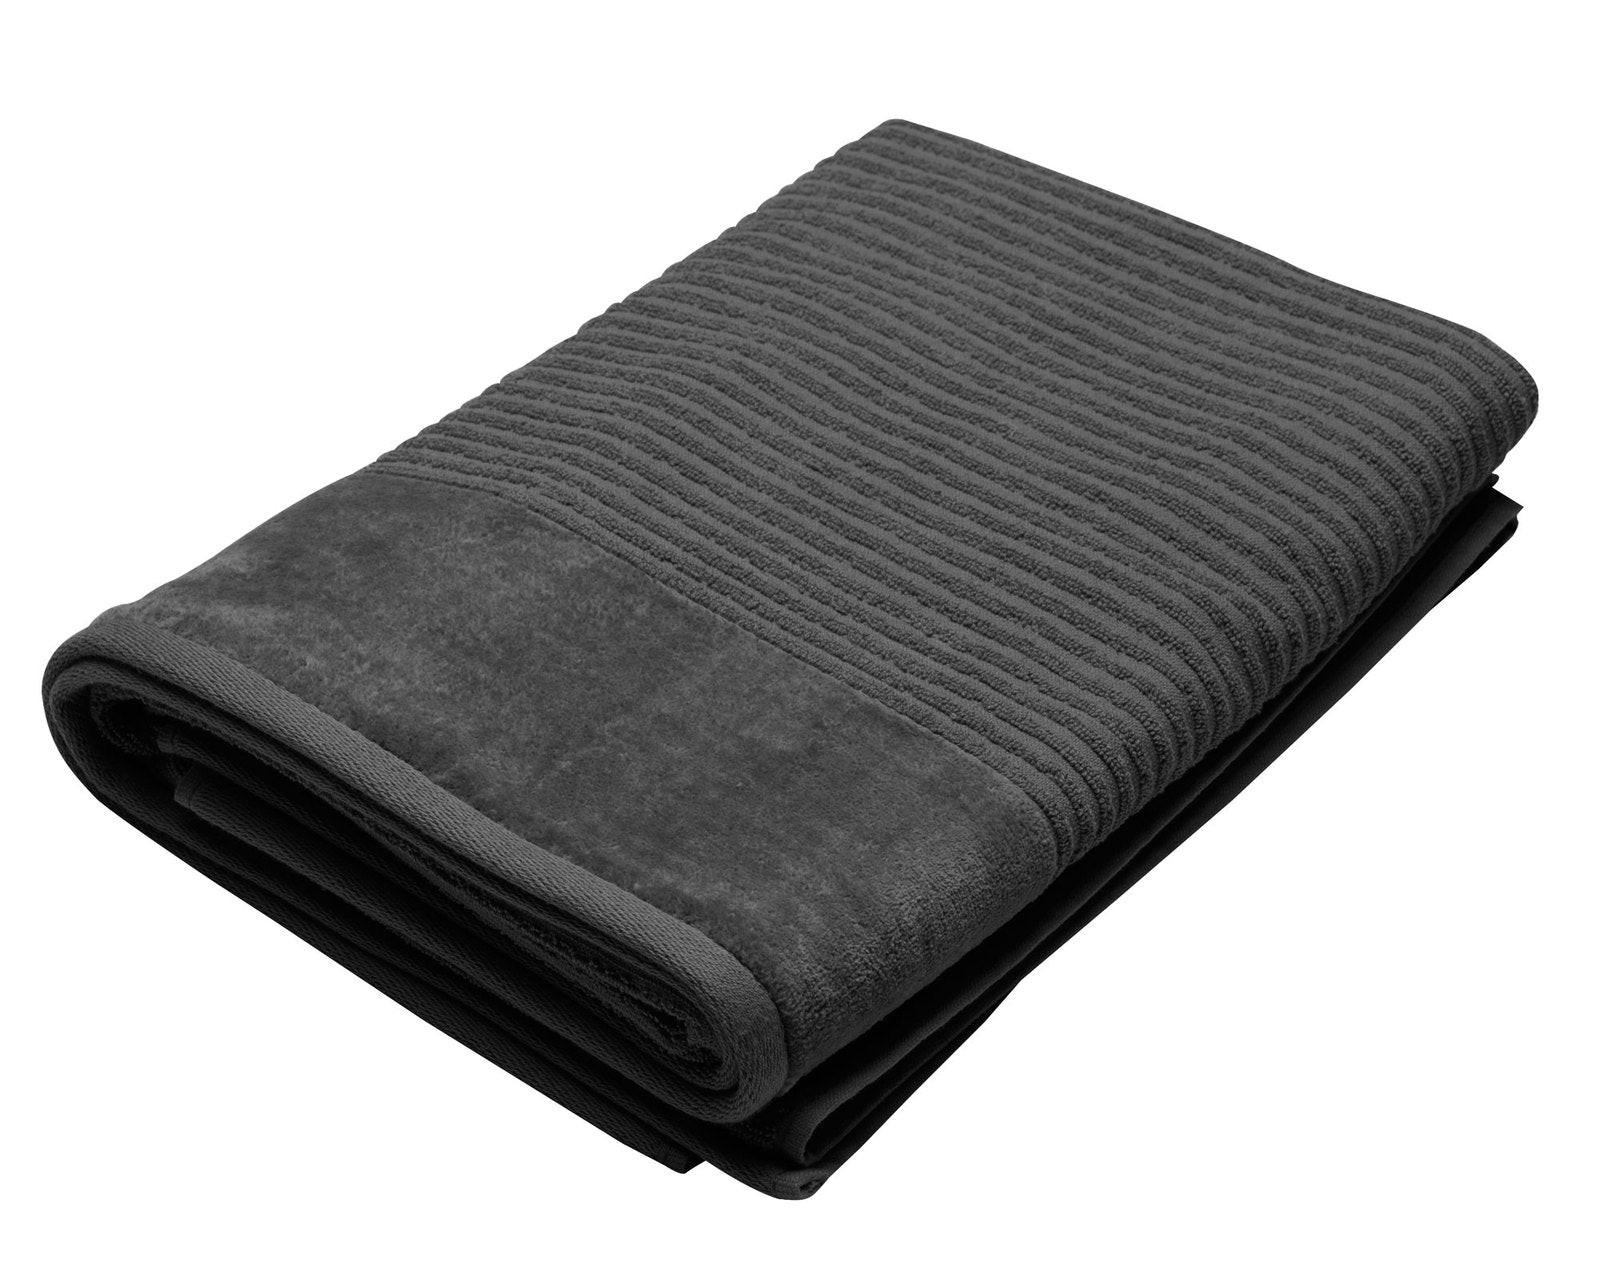 Jenny Mclean Royal Excellency Bath Sheet 2 ply sheared Border 600GSM in Charcoal